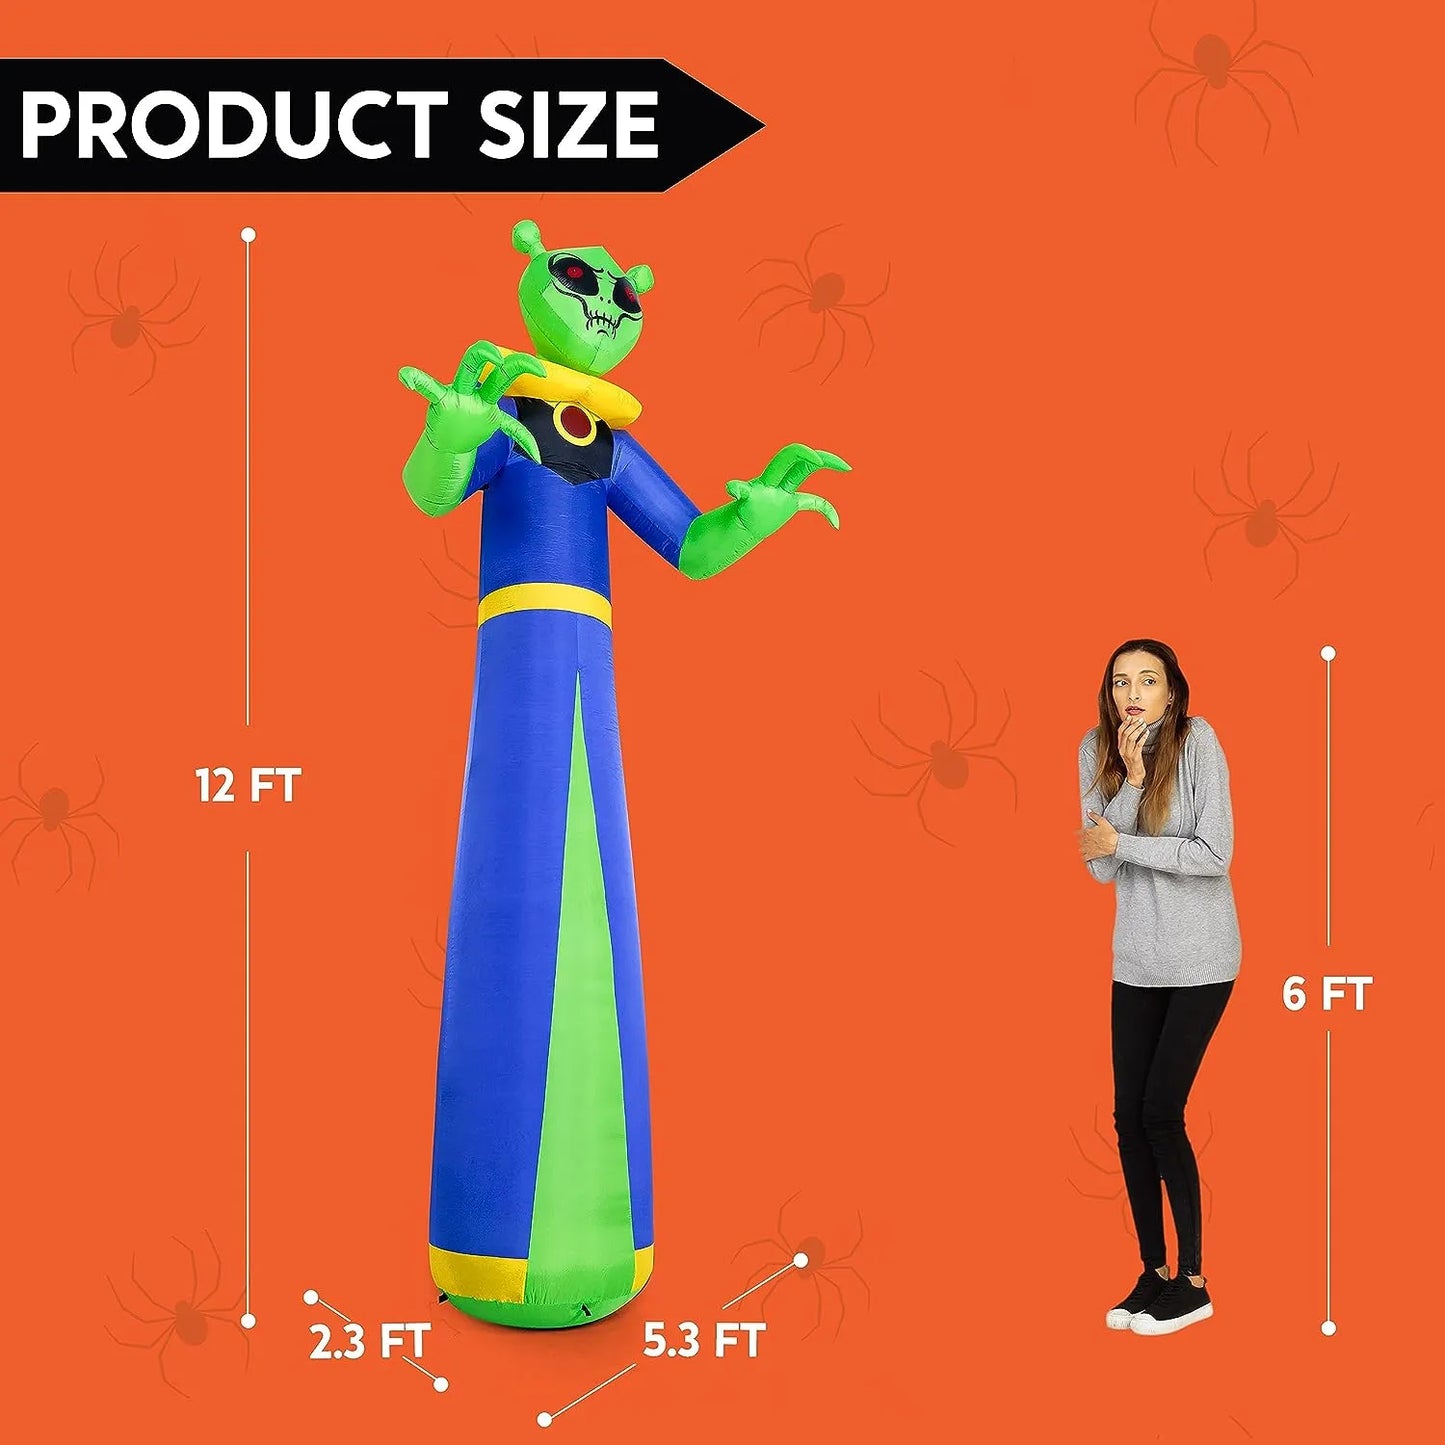 Joiedomi 12ft Tall Giant Halloween Inflatable Alien with Build-in LEDs